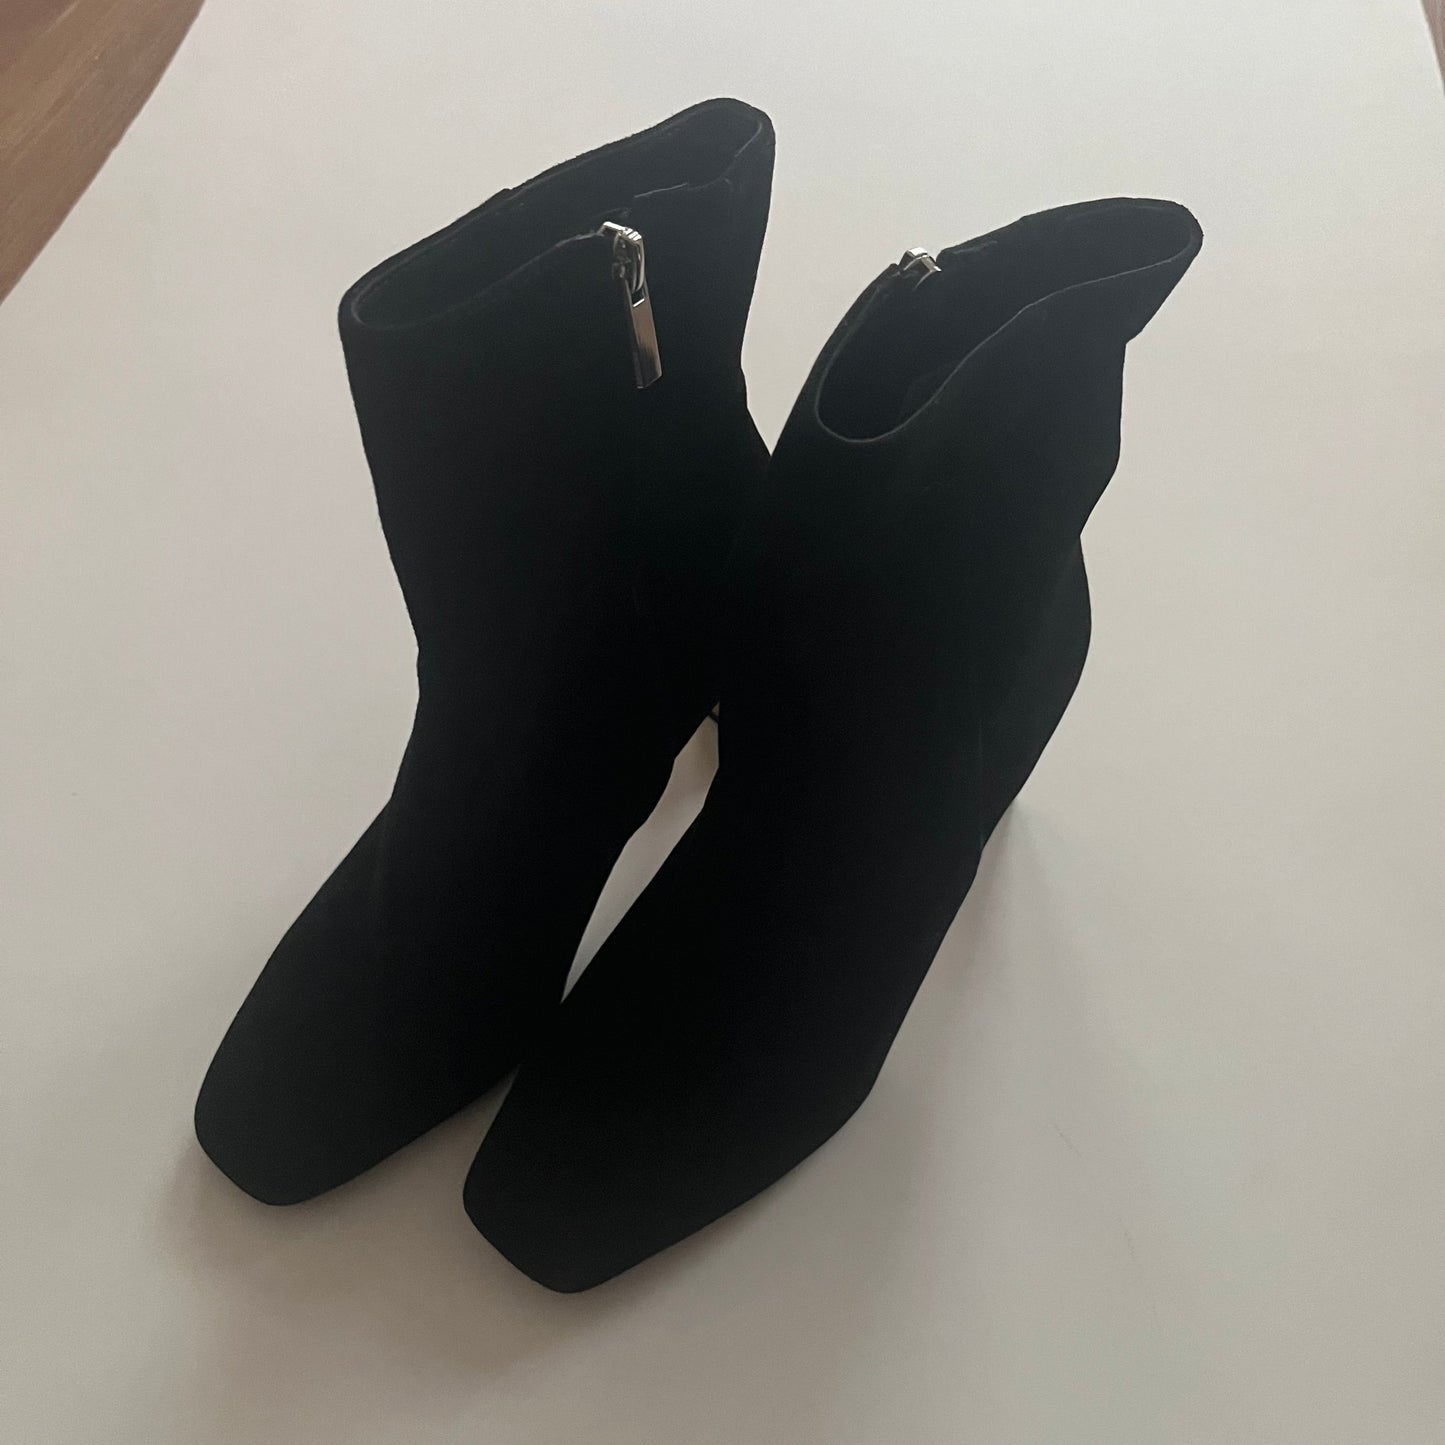 Black Boots Ankle Heels Dolce Vita, Size 6